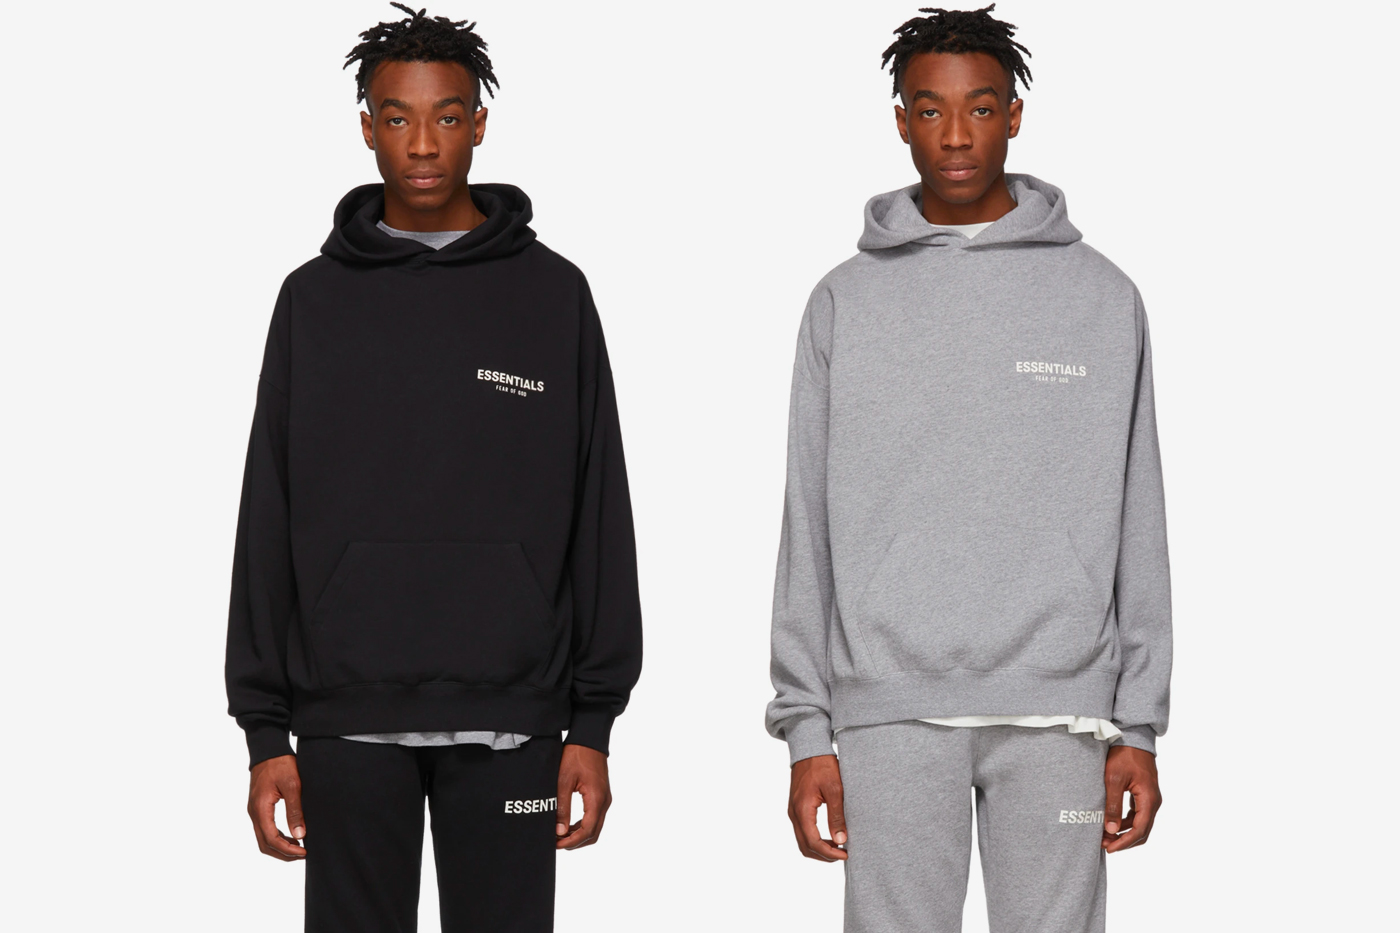 Fear of God releases an affordable collection called Essentials ...